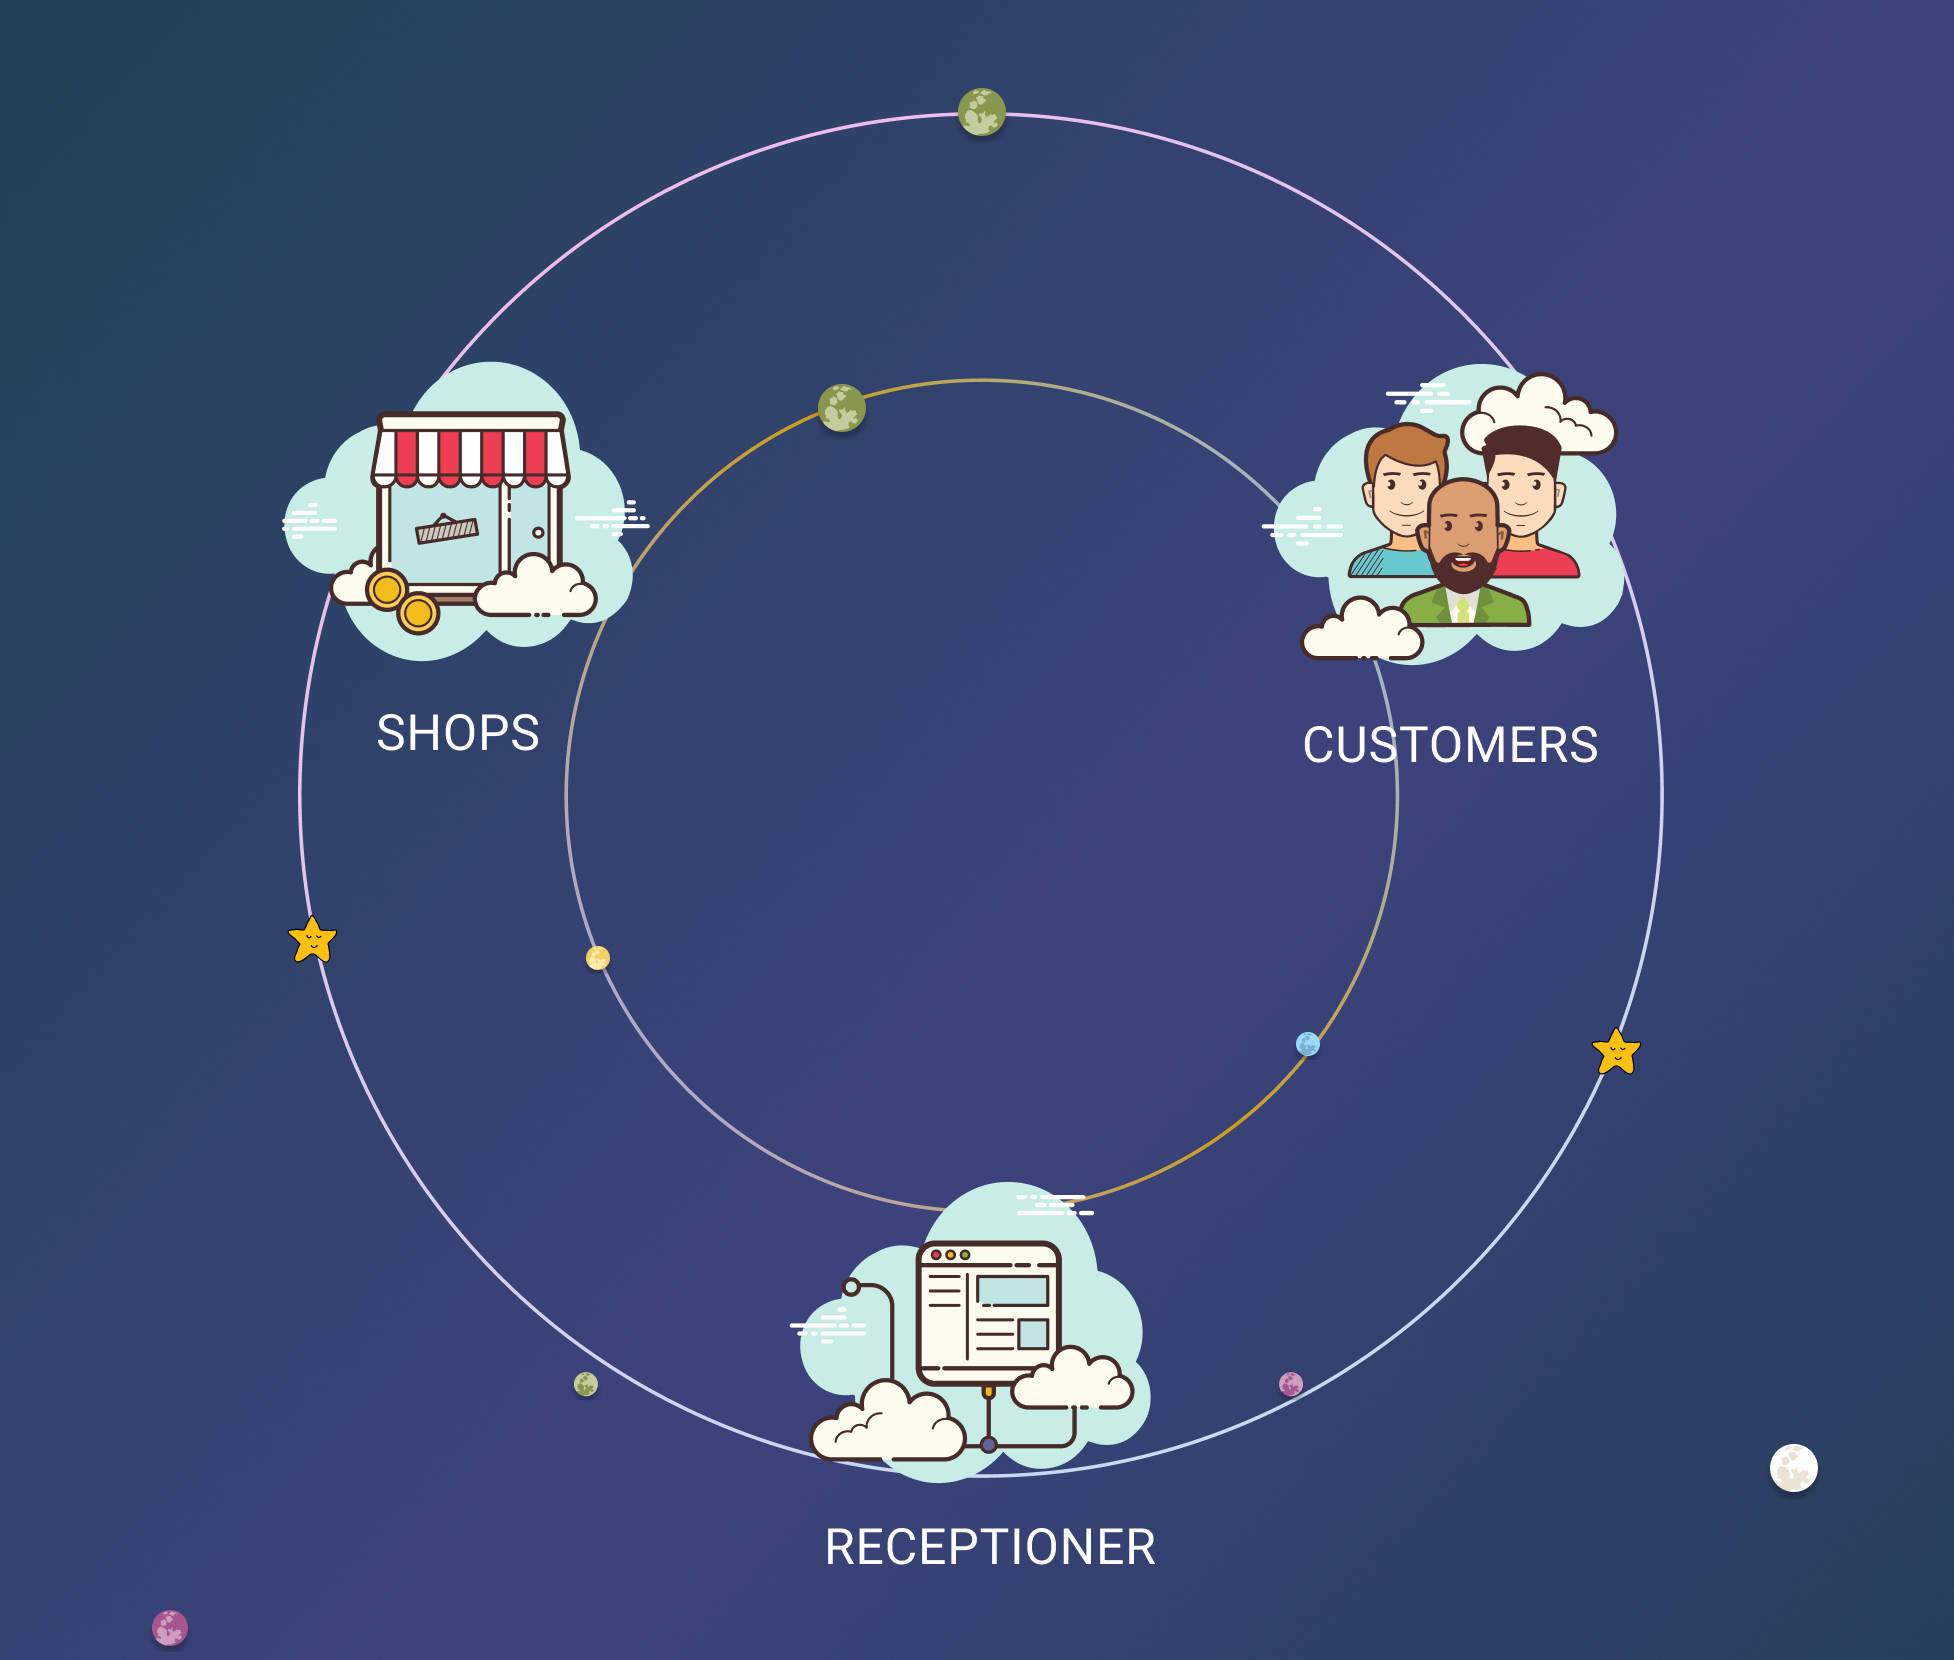 Receptioner - connecting shops with their customers